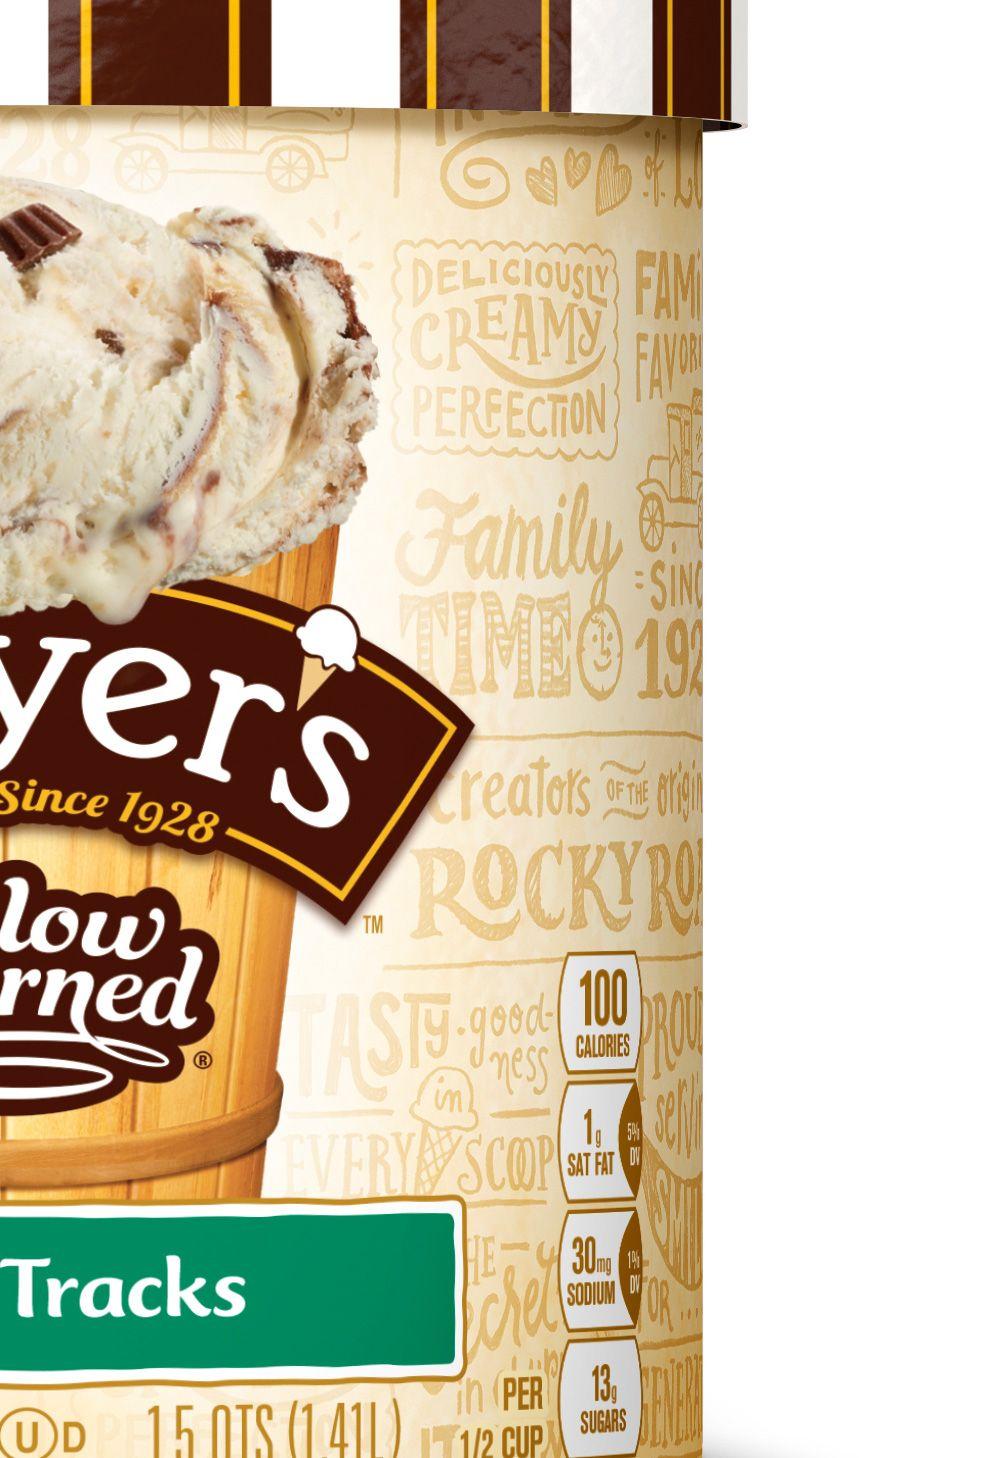 Dreyer's Logo - Brand New: New Logos and Packaging for Dreyer's and Edy's Ice Cream